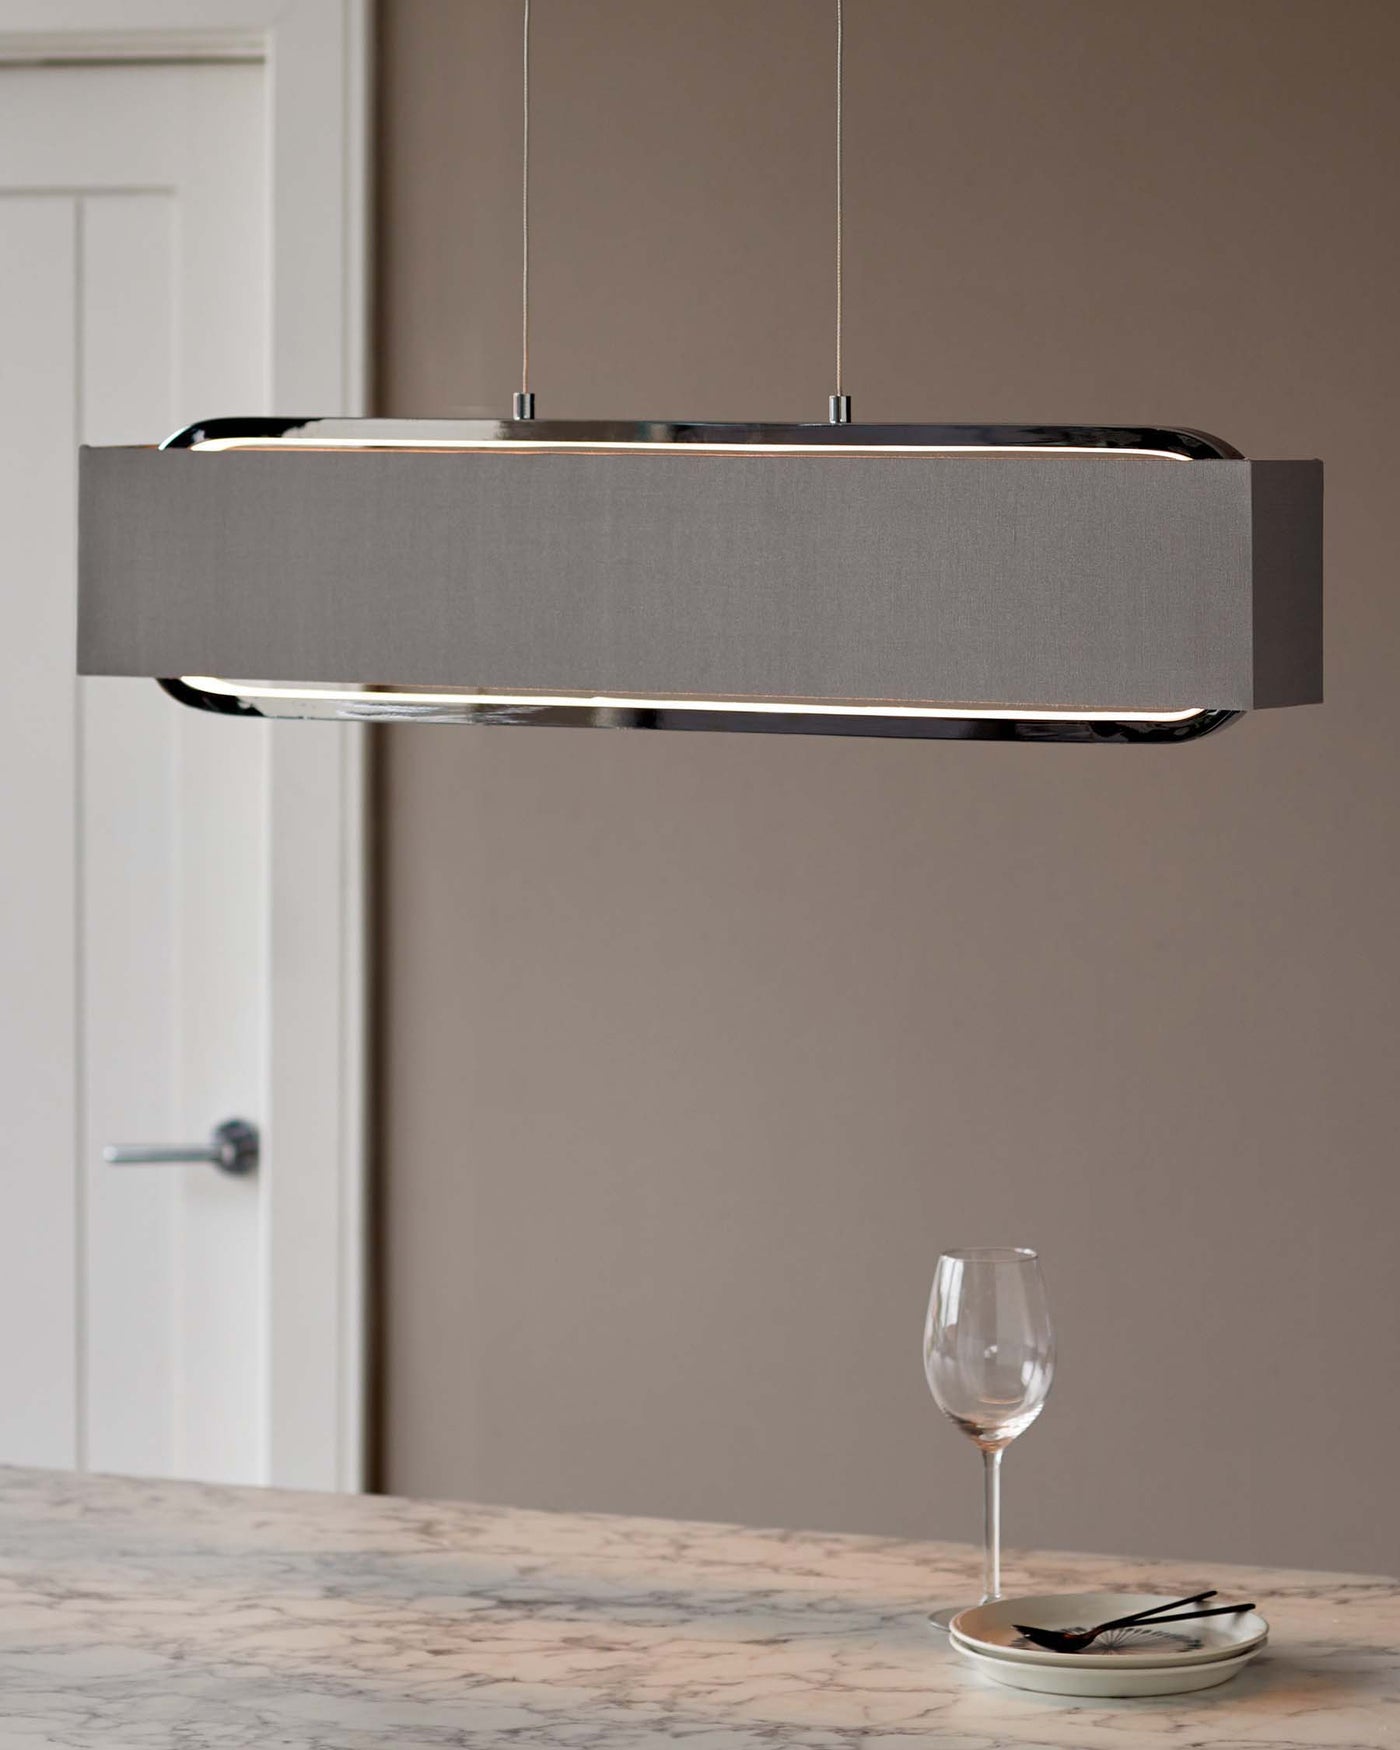 Contemporary rectangular pendant light with a grey fabric shade and polished chrome accents hanging above a marble countertop.